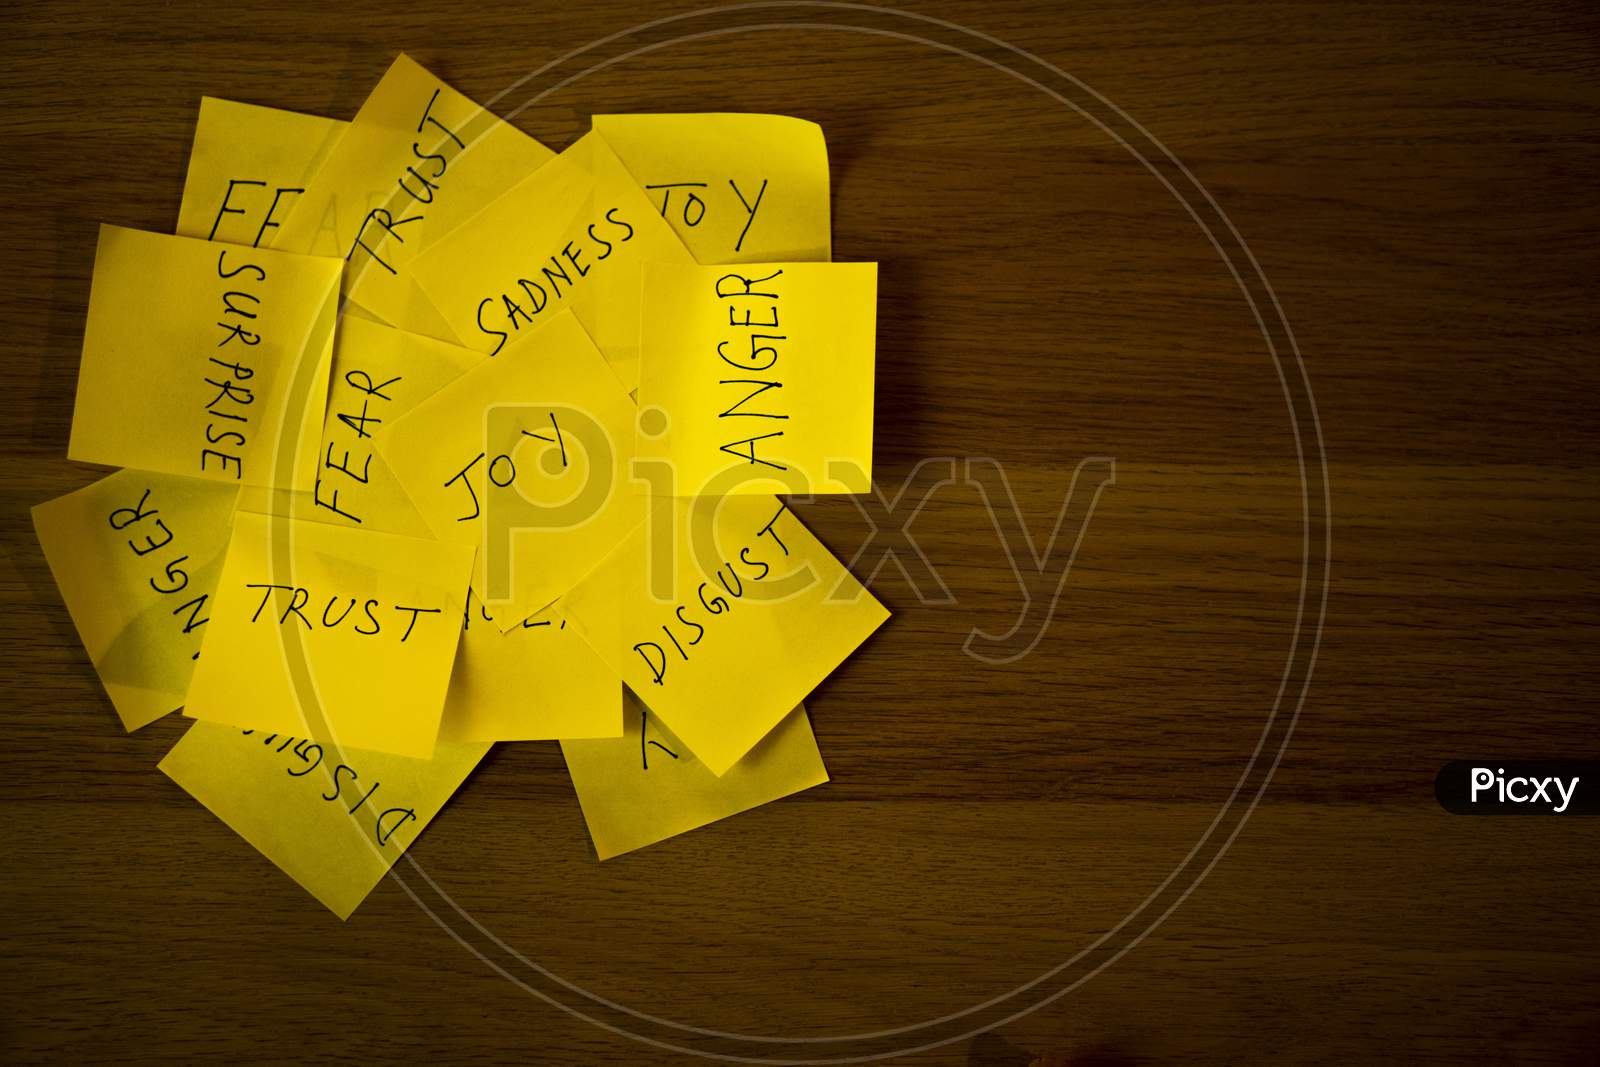 Types of human emotions written on a pile of sticky notes.